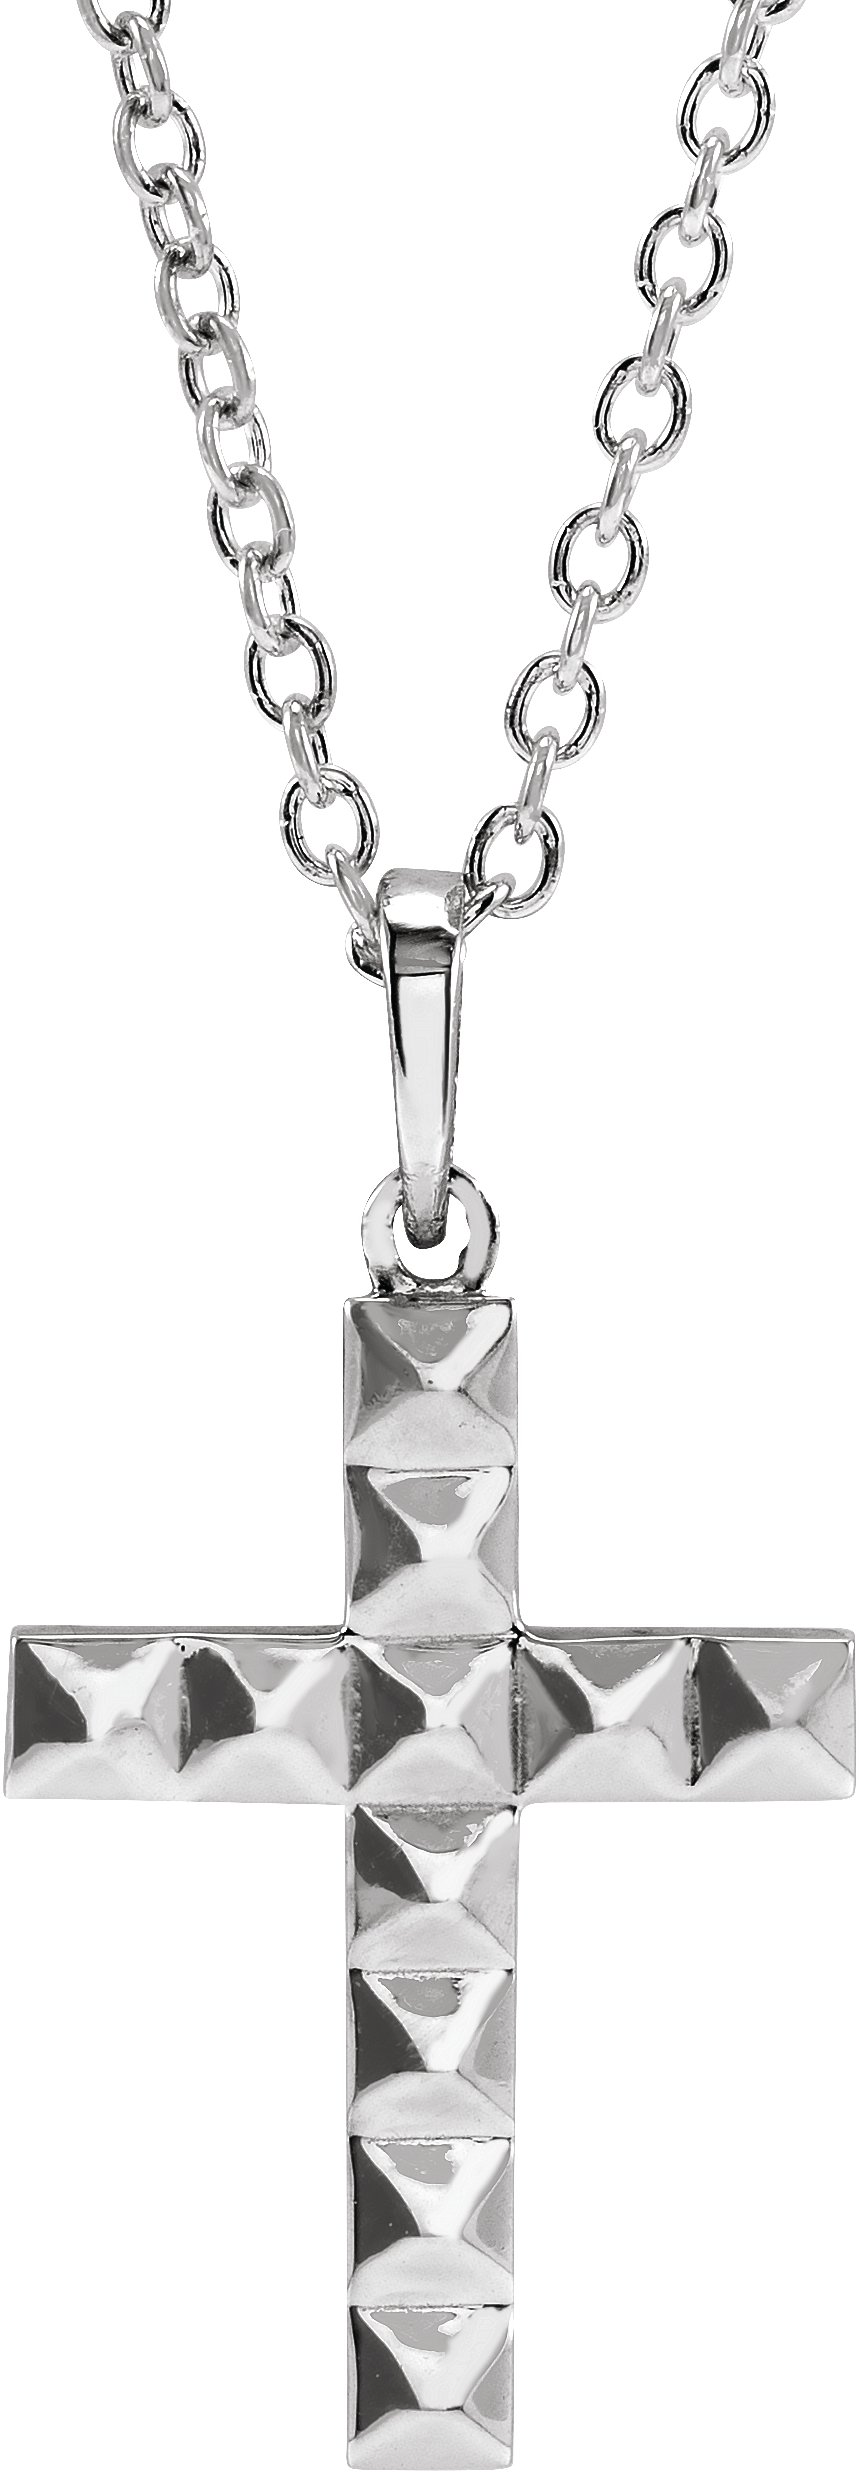 14K White 27.22x14.29 mm Pyramid Cross 20" Necklace